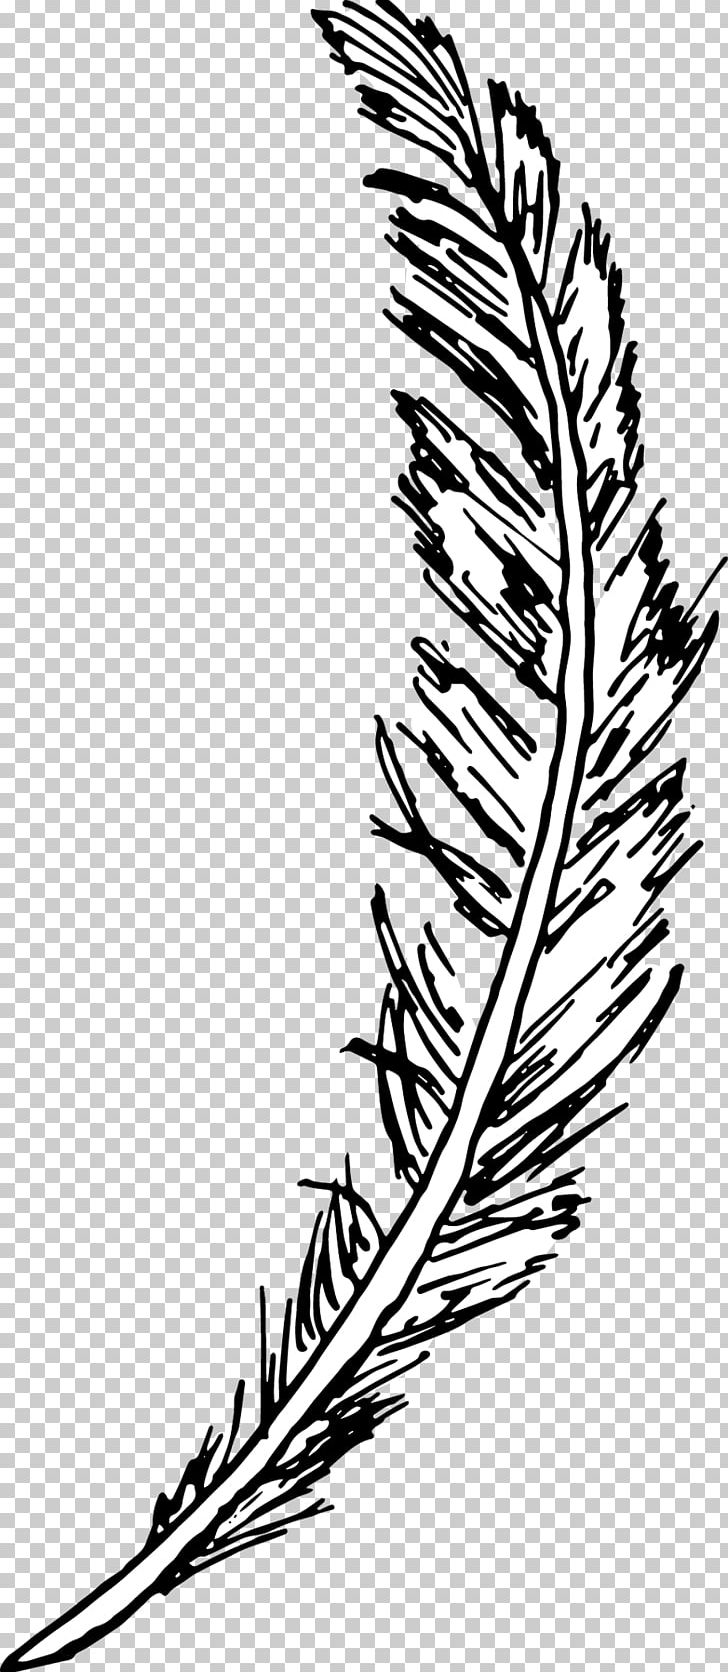 Line Art Drawing Feather Bird Sketchbook PNG, Clipart, Animals, Beak, Bird, Black And White, Book Free PNG Download